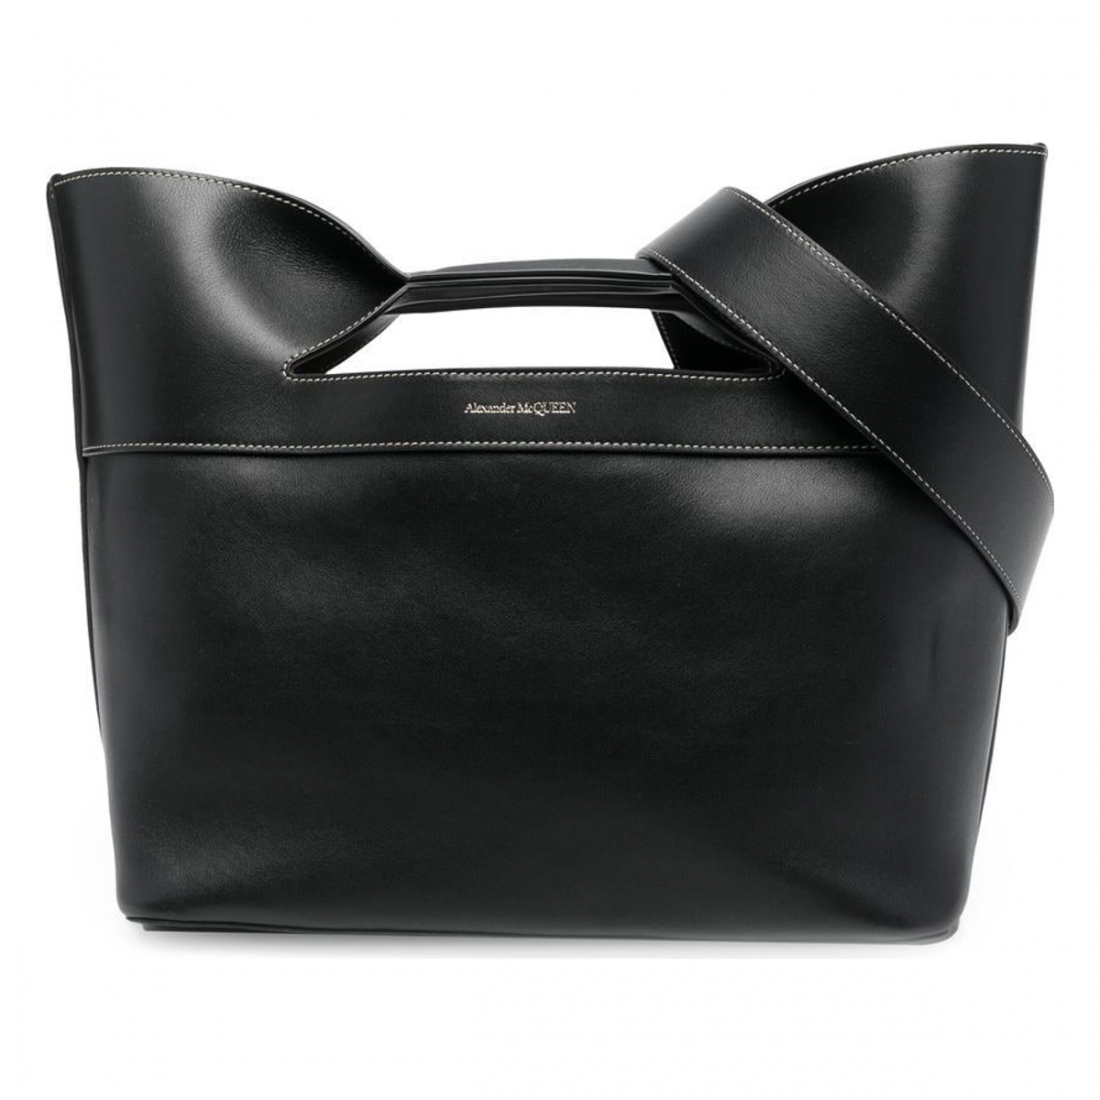 Women's 'The Bow Small' Top Handle Bag